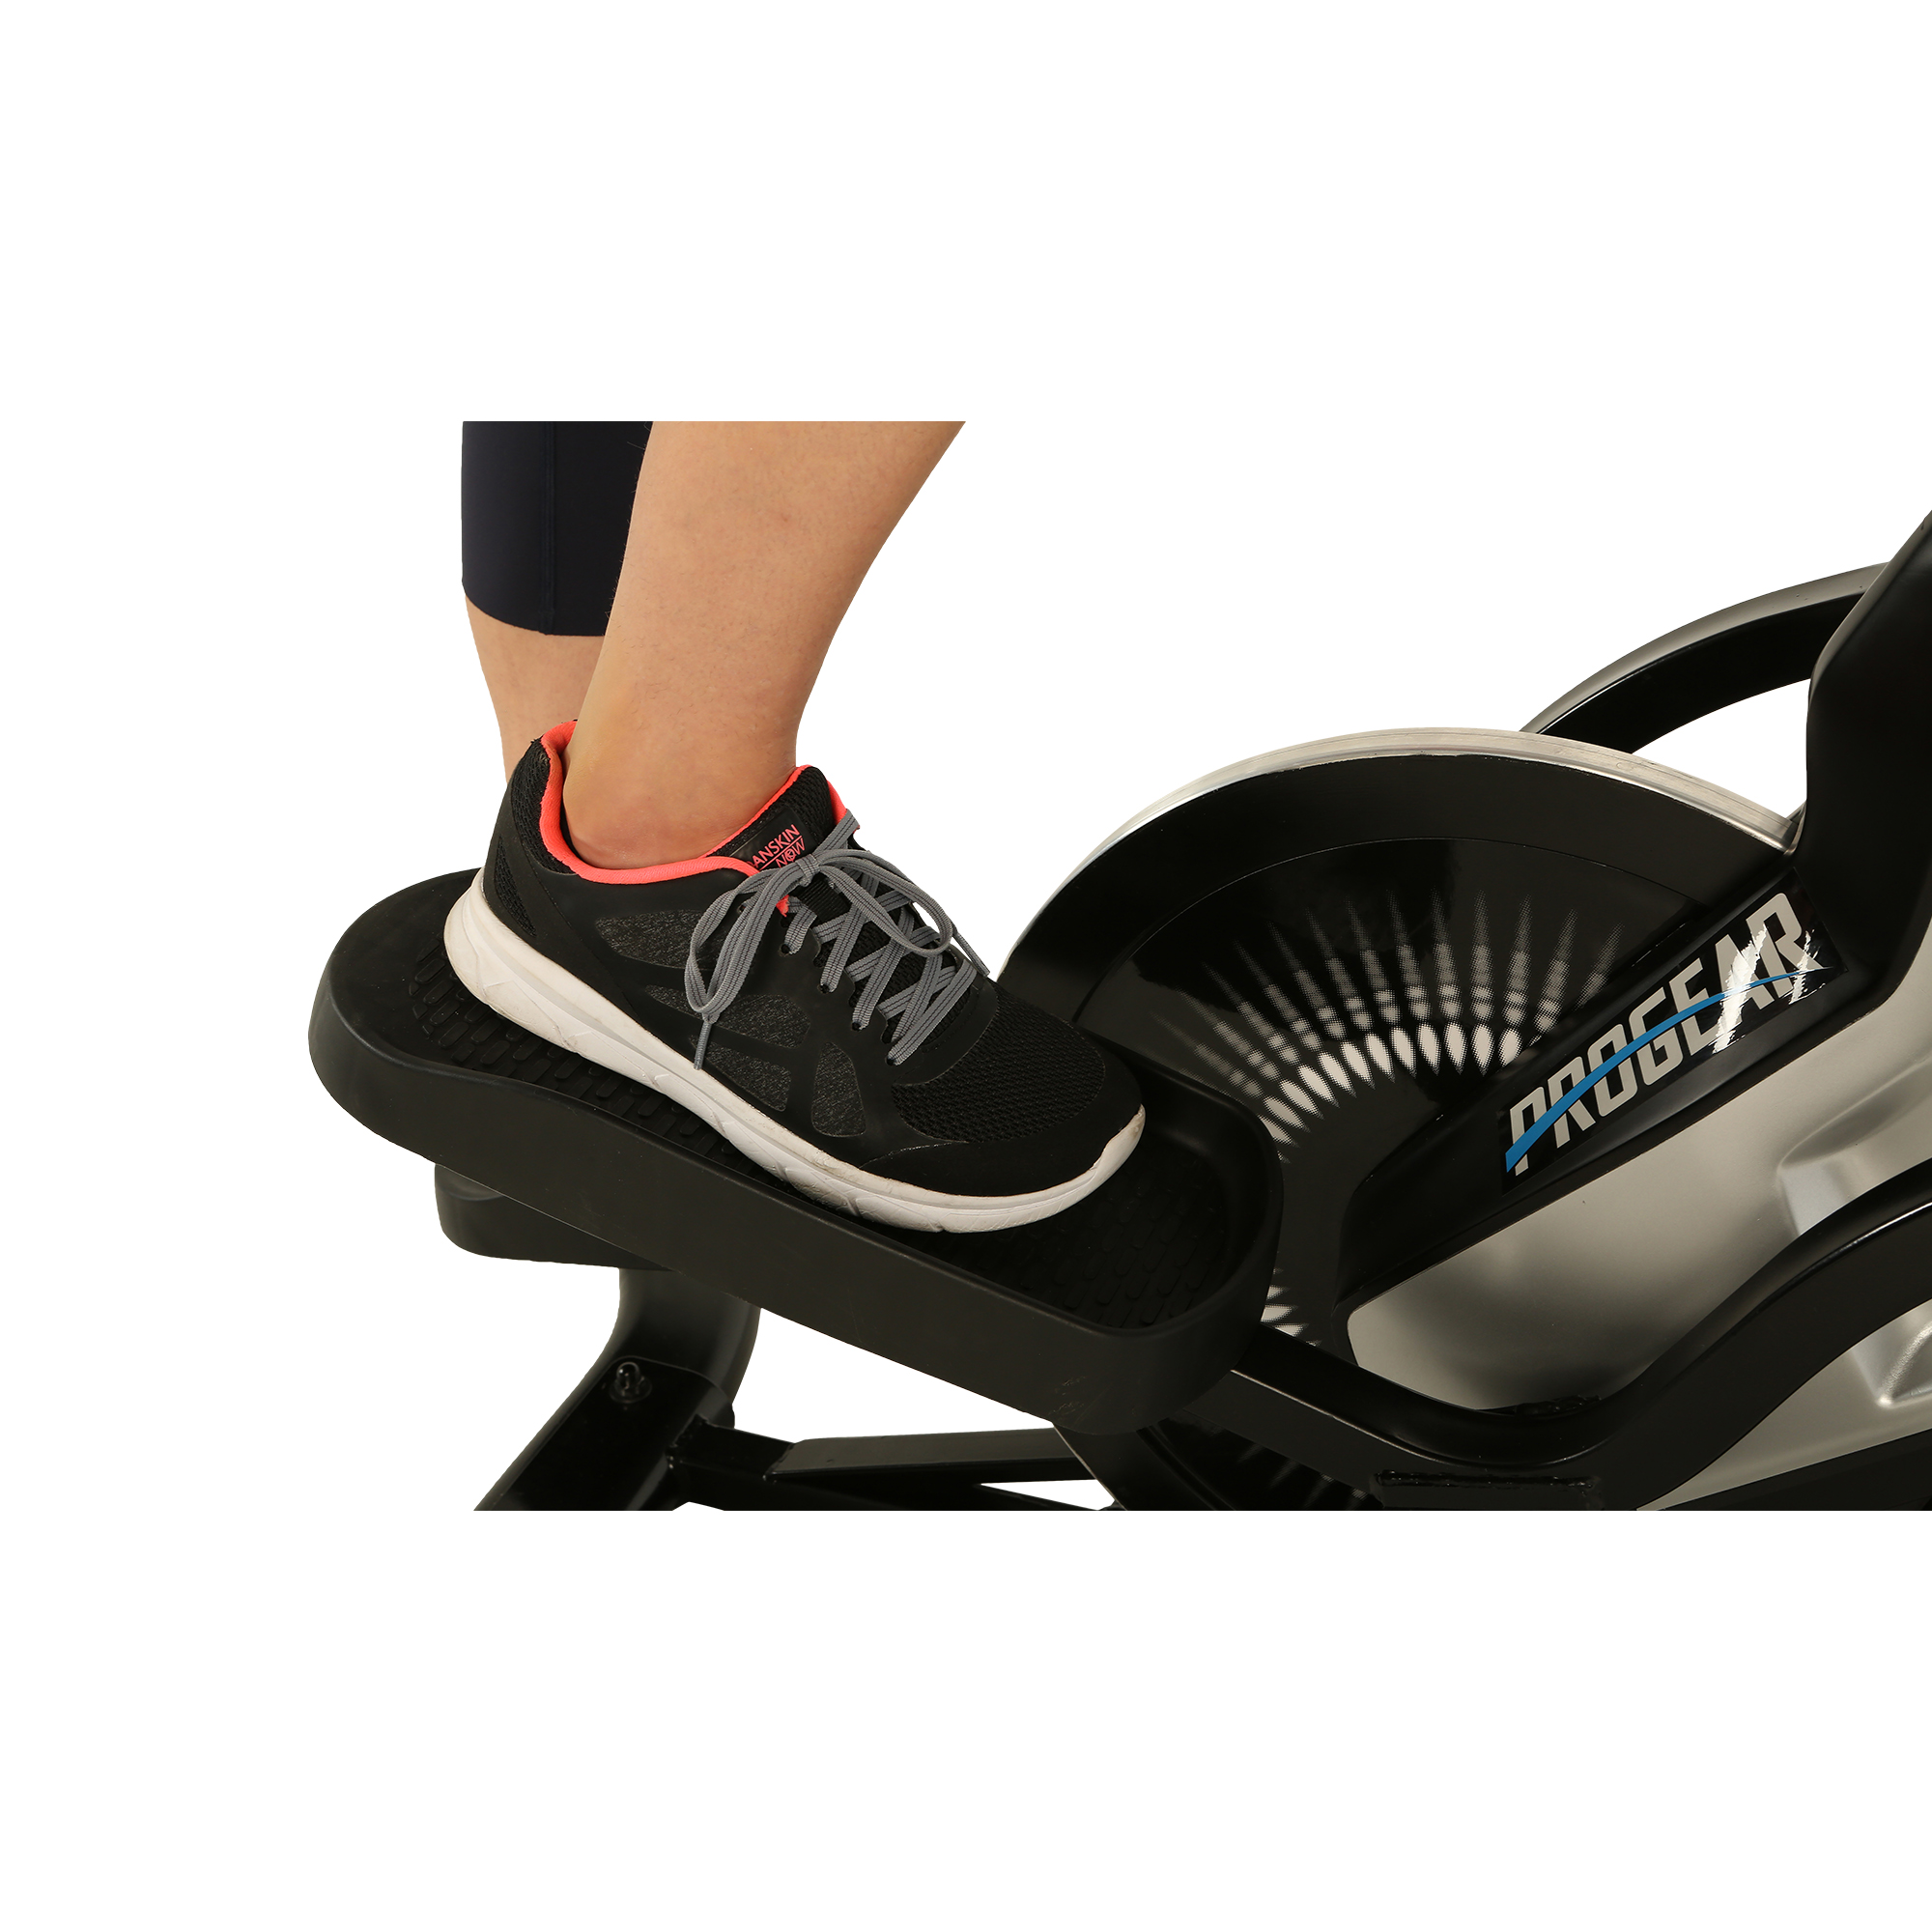 PROGEAR 9900 HIIT Bluetooth Smart Cloud Fitness Crossover Stepper/ Elliptical Trainer with Goal Setting and Free App - image 16 of 19